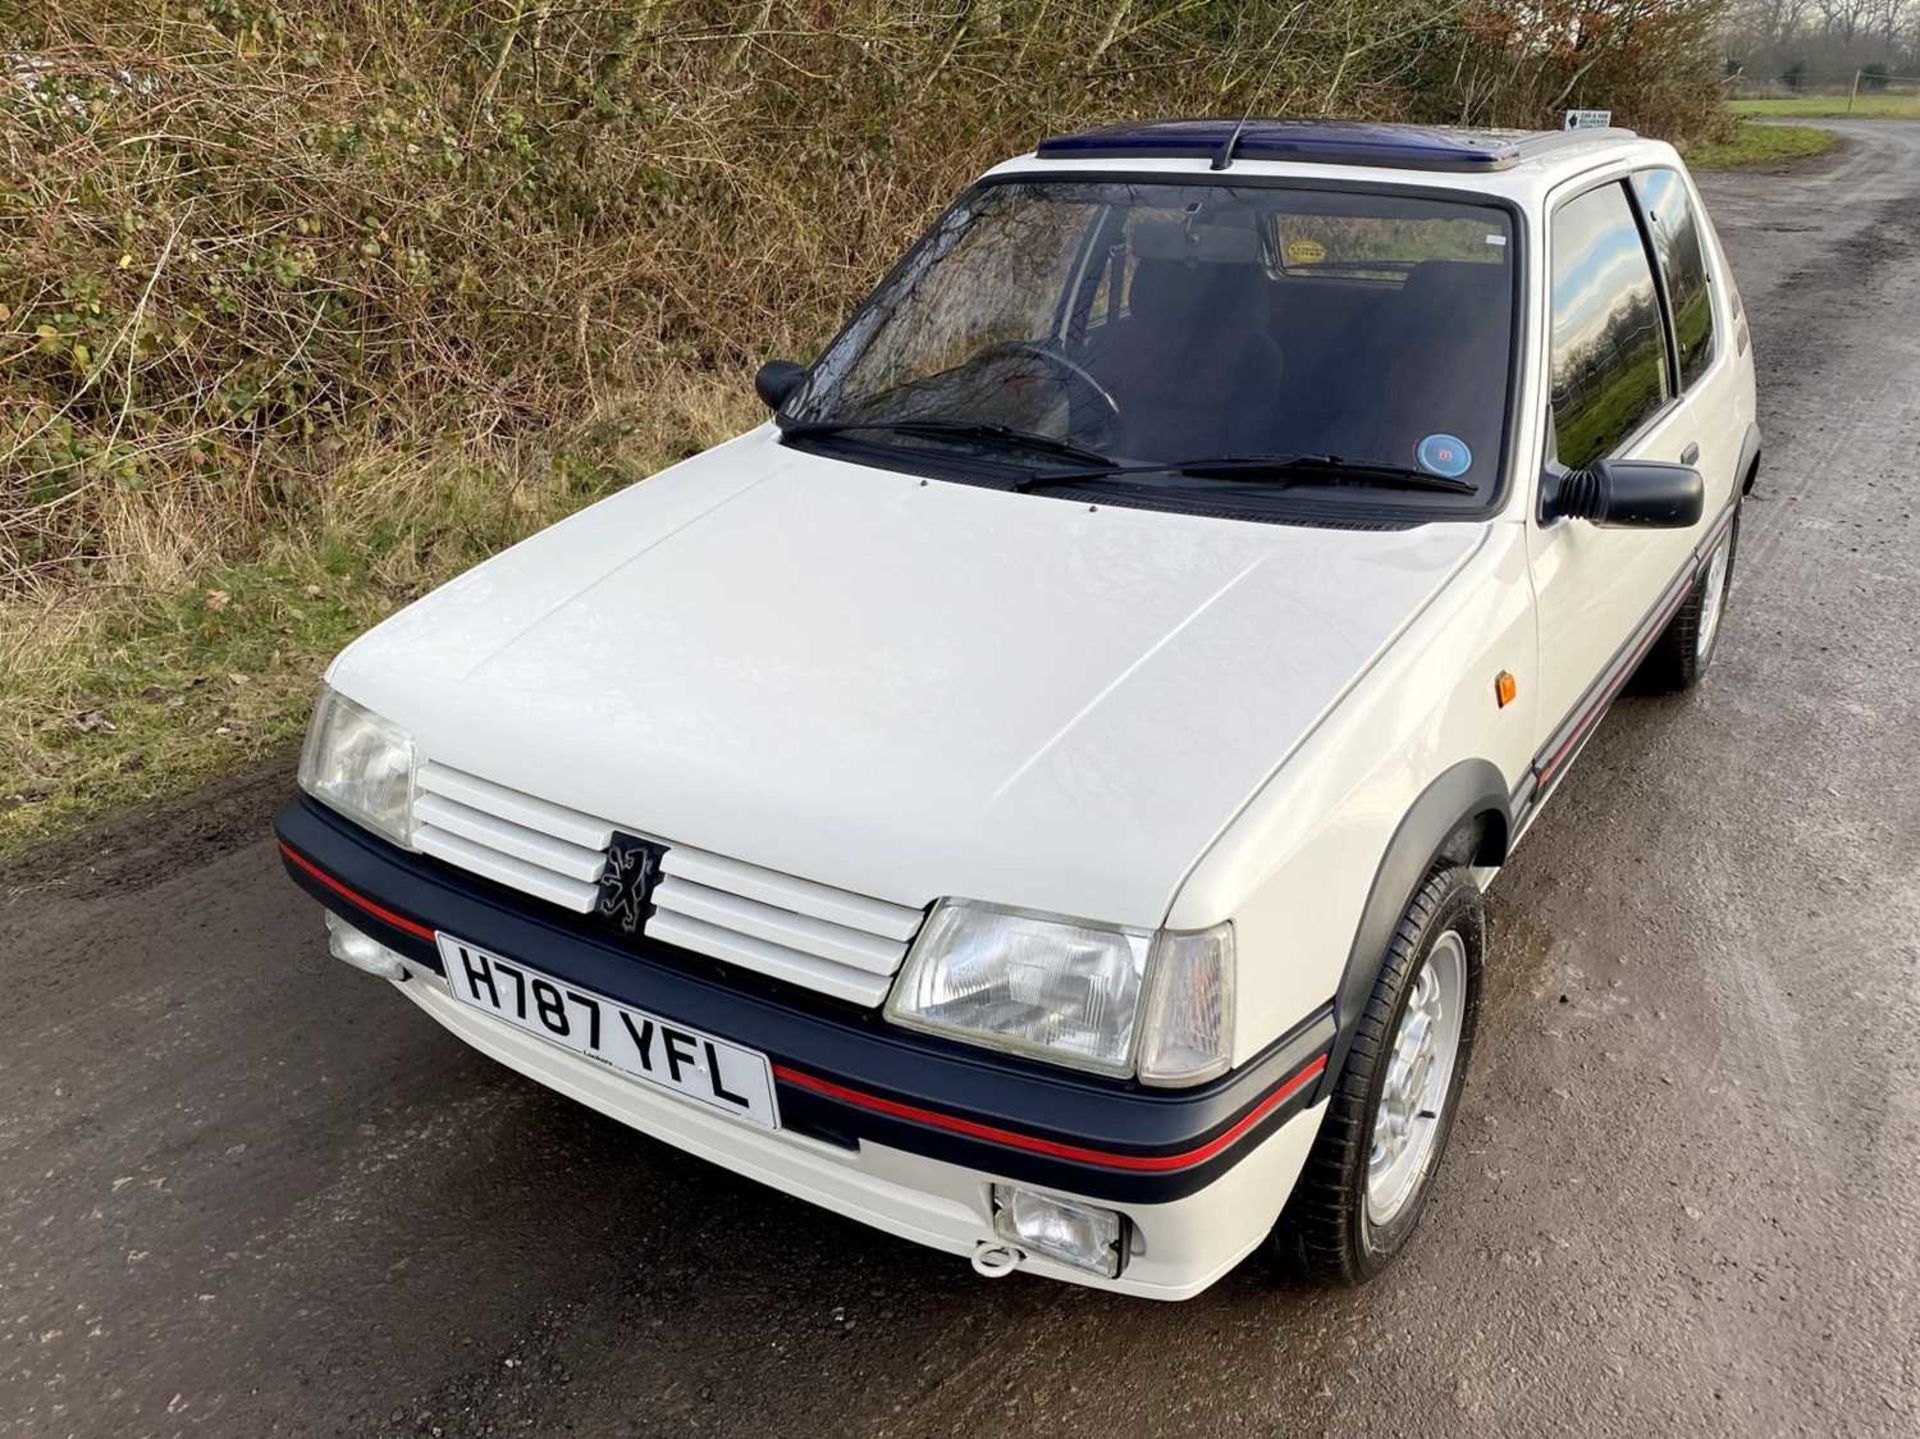 1990 Peugeot 205 GTi 1.6 Only 56,000 miles, same owner for 16 years - Image 8 of 81